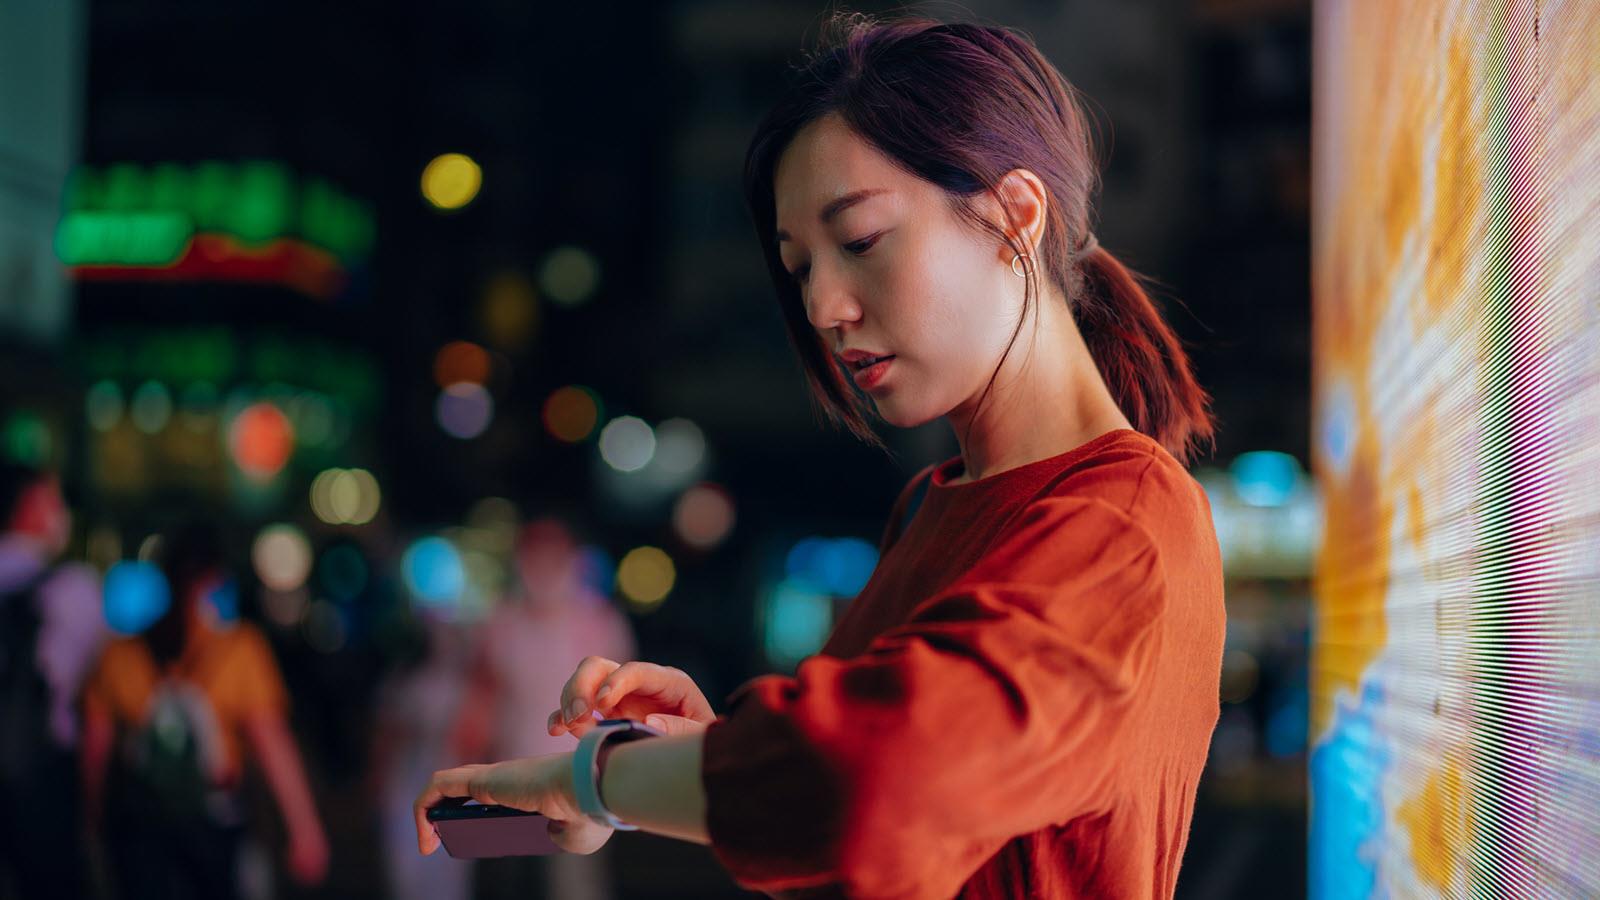 woman looks at smartwatch